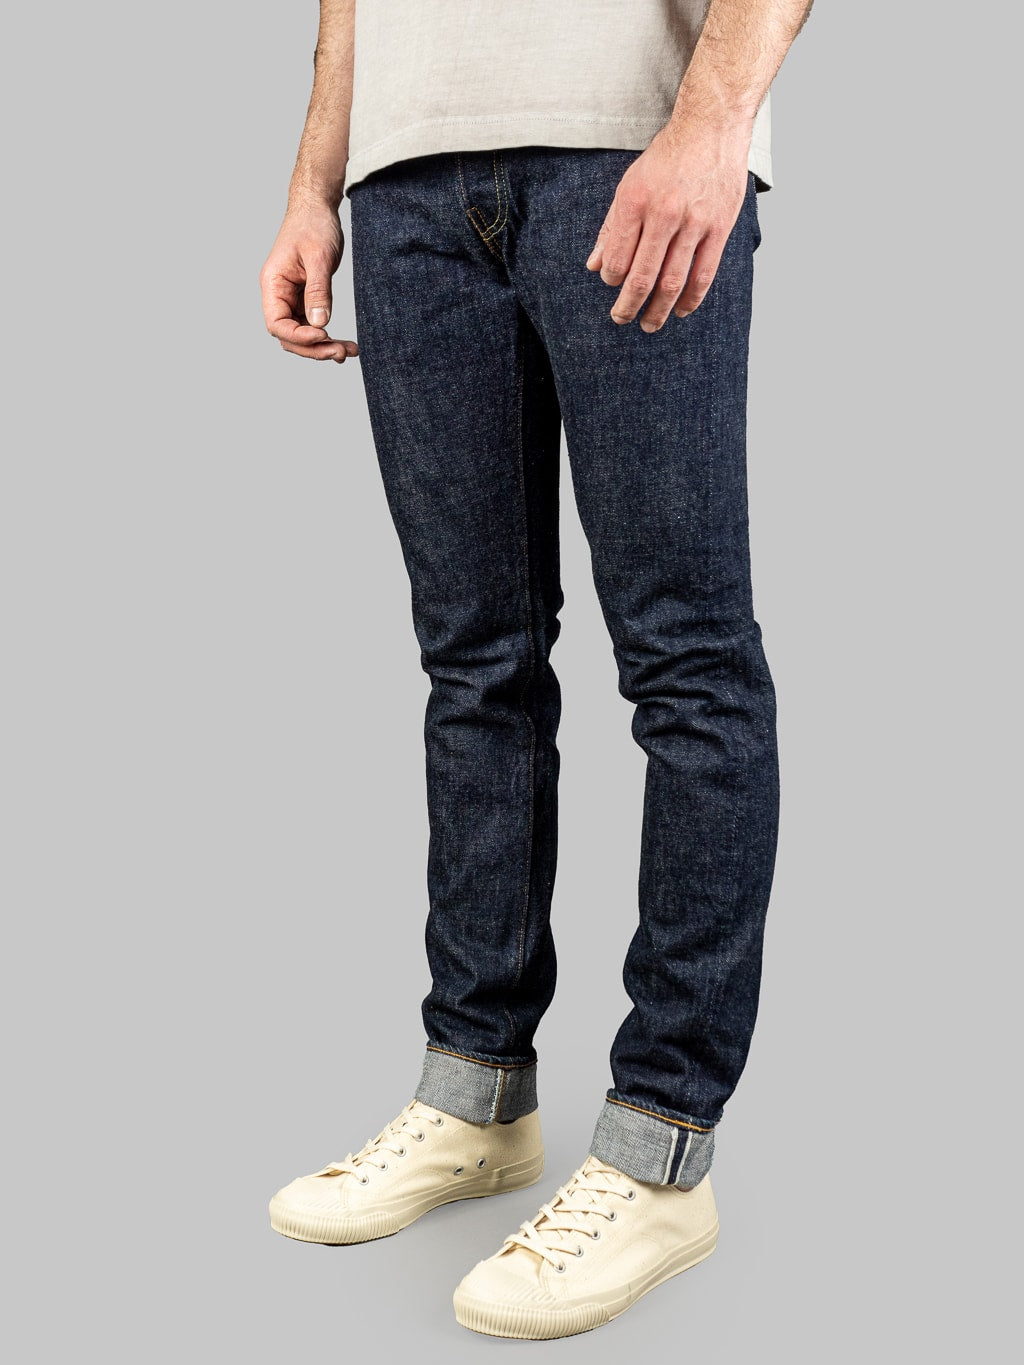 TCB 50s Slim R Jeans  side fit